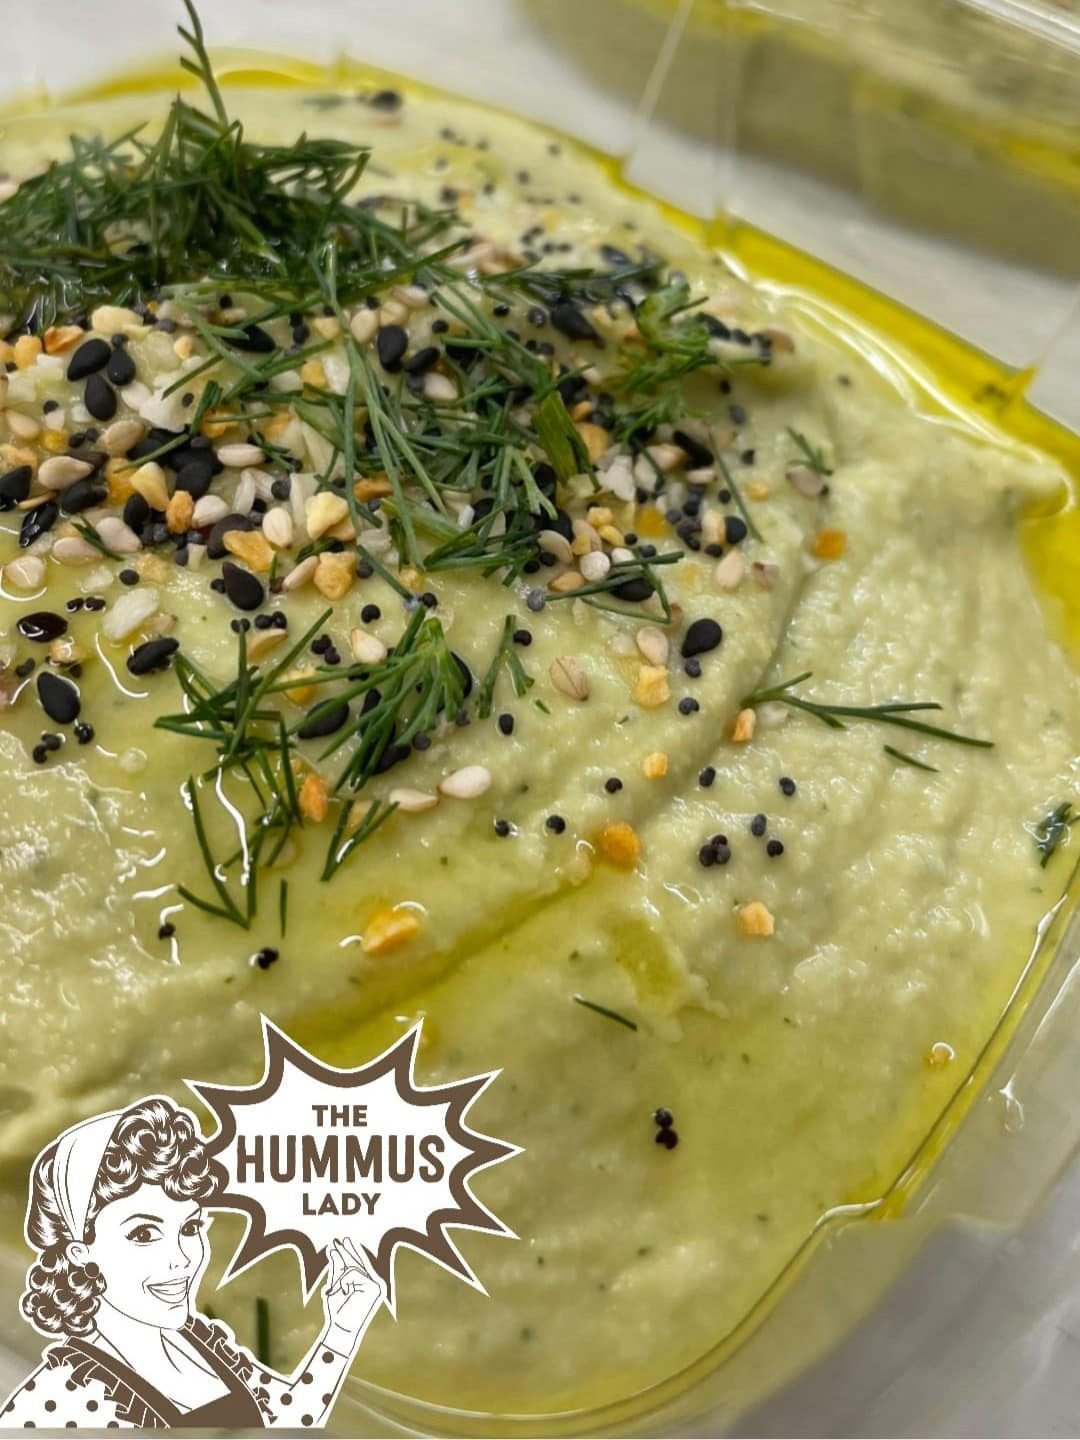 Container of deli dill pickle hummus topped with multi colored sesame seeds and fresh dill herb | Made by The Hummus Lady Pensacola